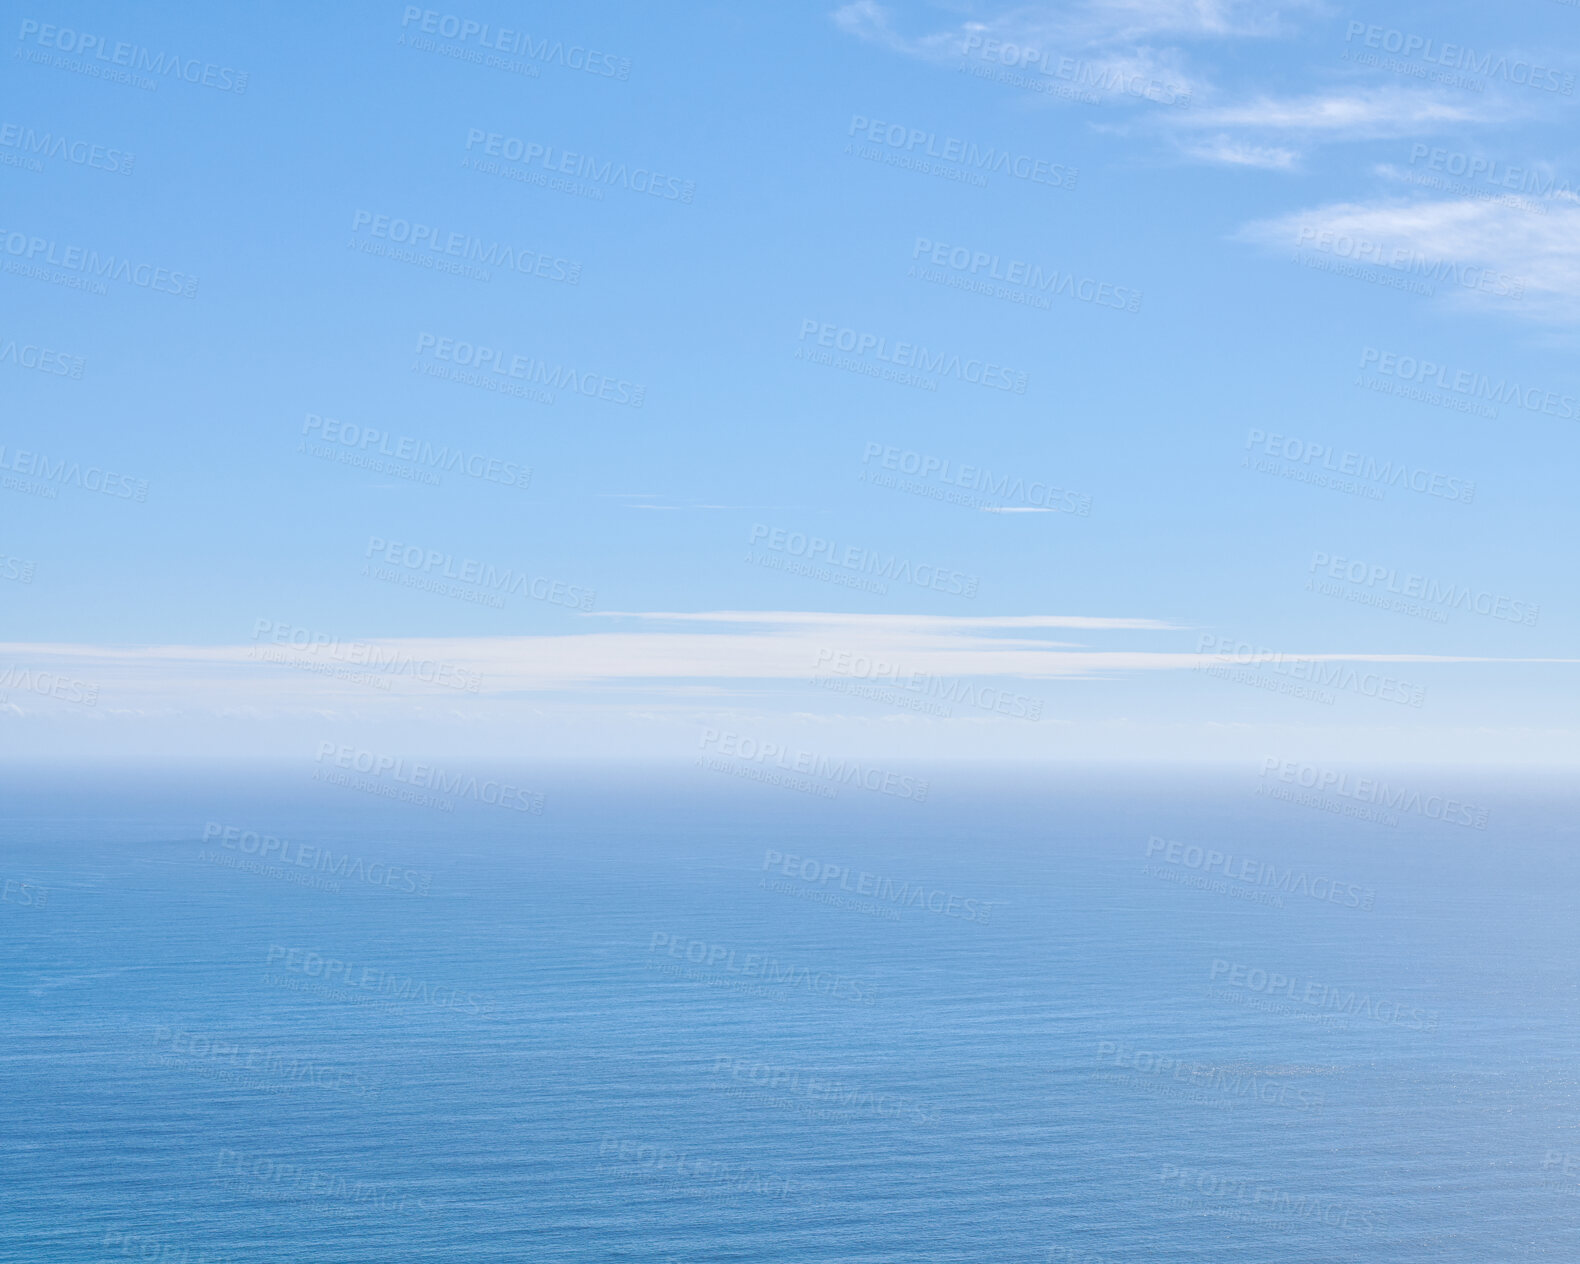 Buy stock photo Peaceful, calm and soft ocean view with empty sea, blue sky copy space and background in summer. Serene aerial landscape and copyspace of an open aqua surface seascape with light cloud on the horizon